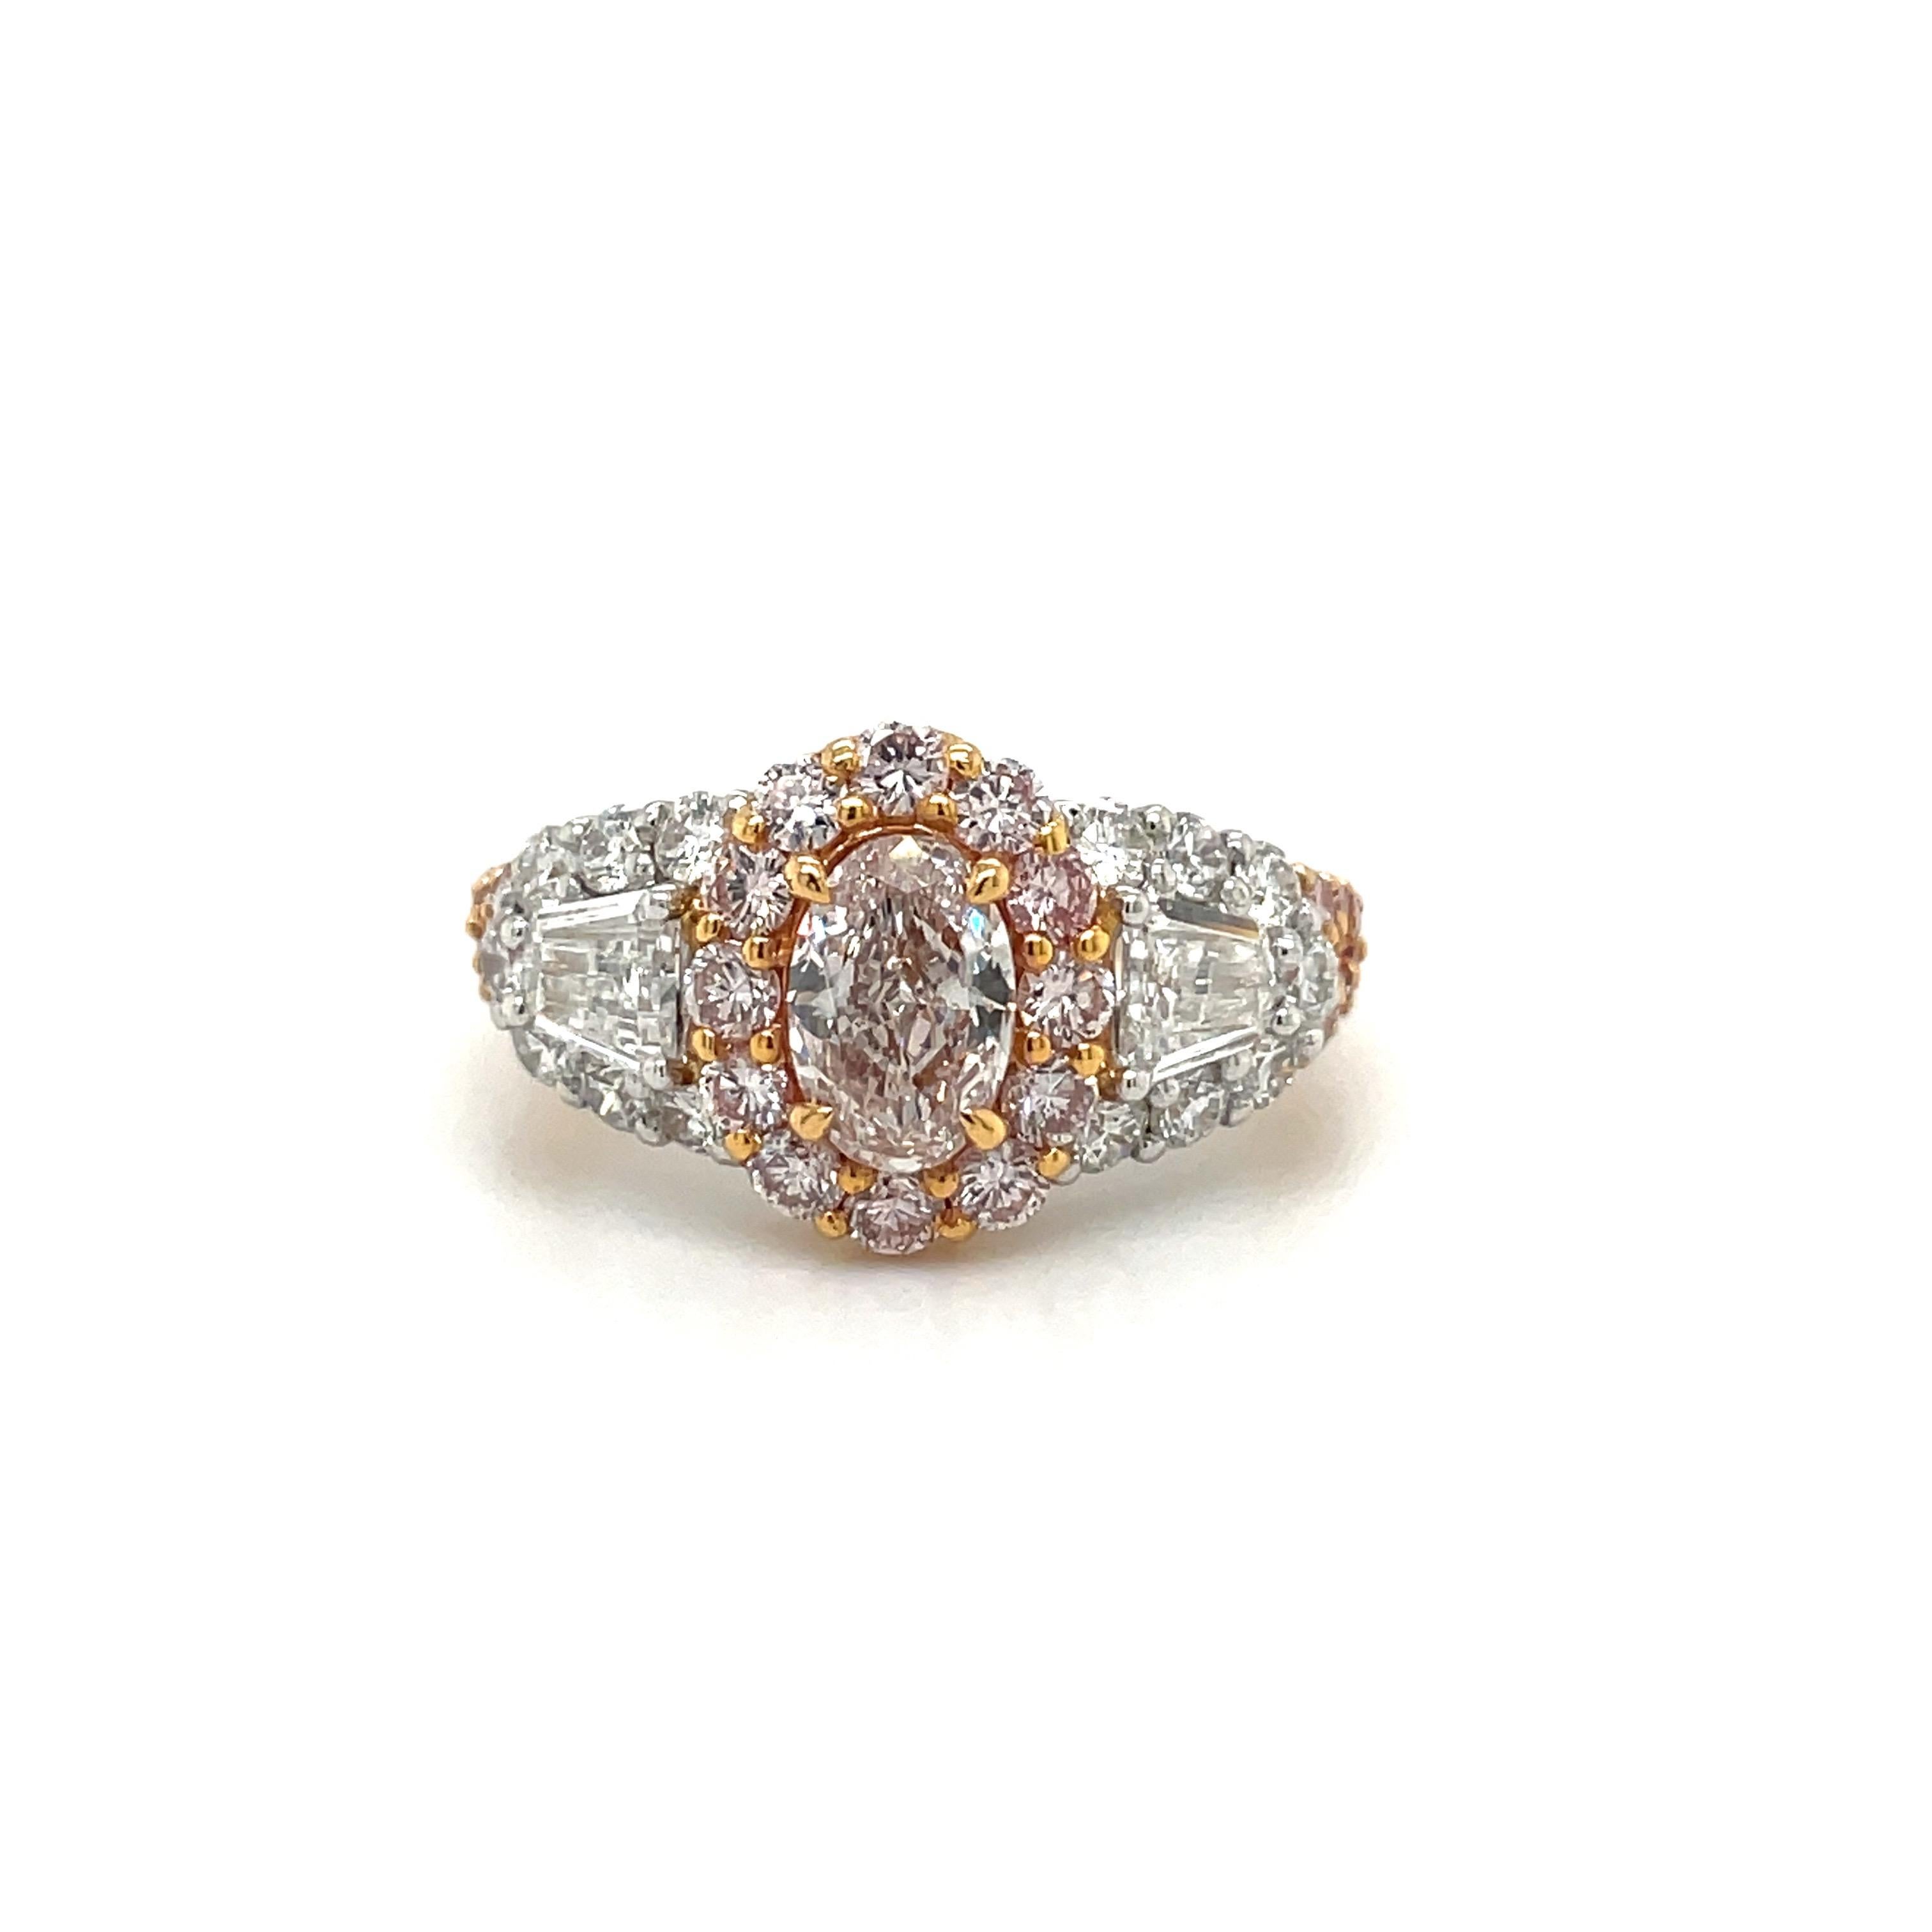 Fancy Light Pink Diamond Ring with White Diamonds Set in Rose Gold and Platinum For Sale 3